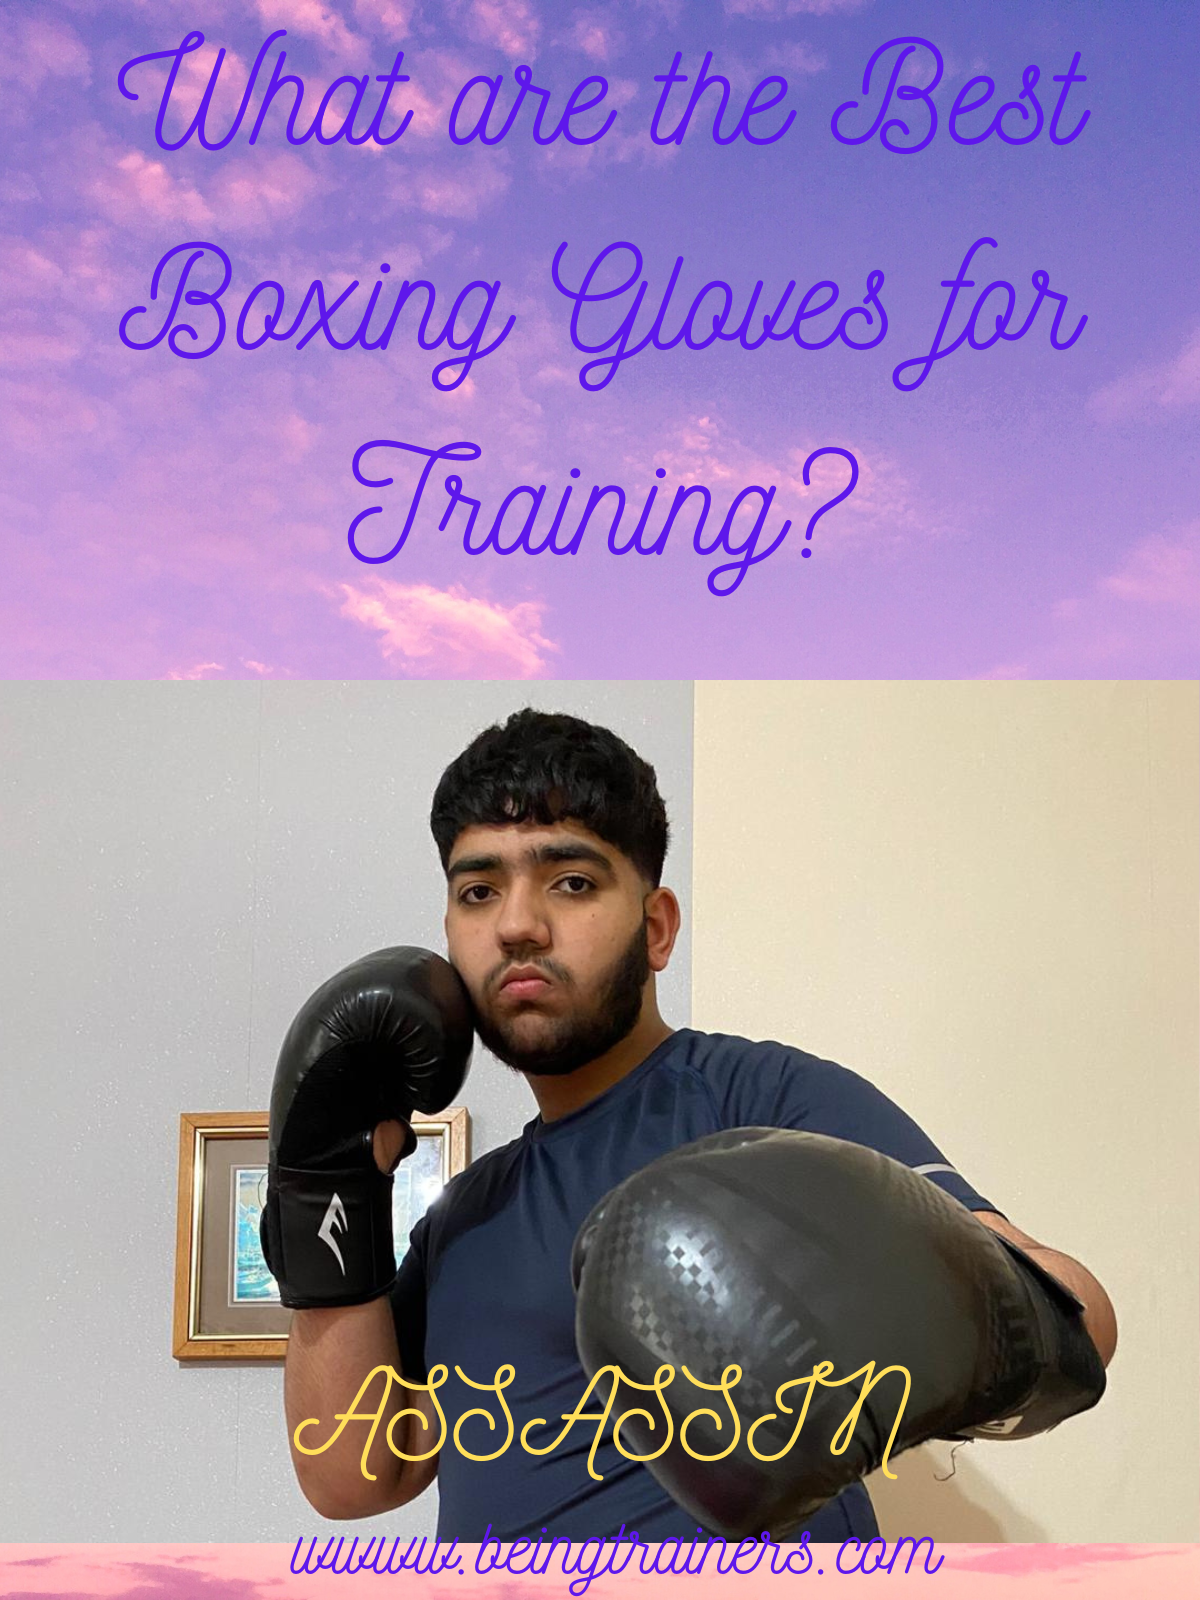 What are the Best Boxing Gloves for Training?